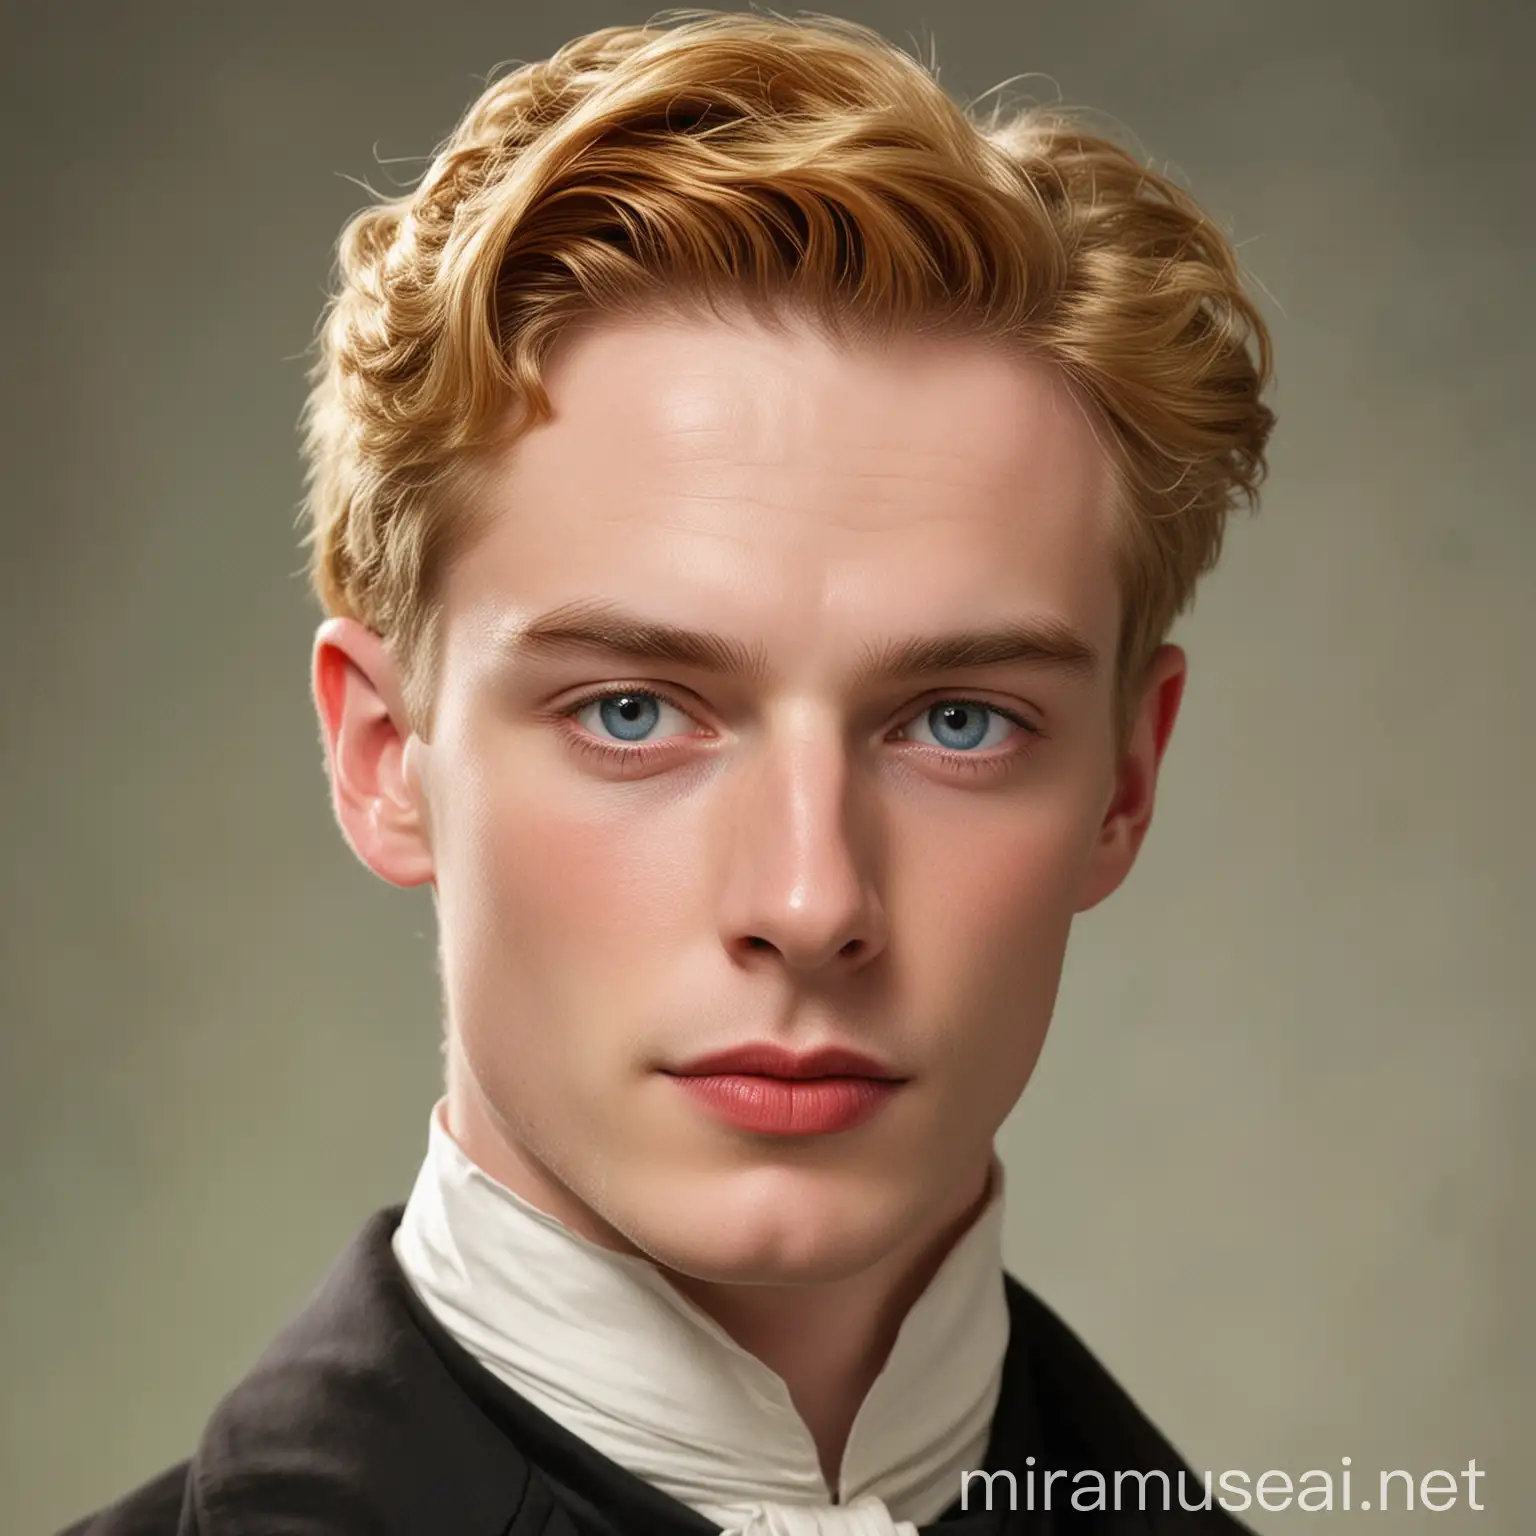 Handsome 19th Century Man with Scarlet Lips and Blue Eyes